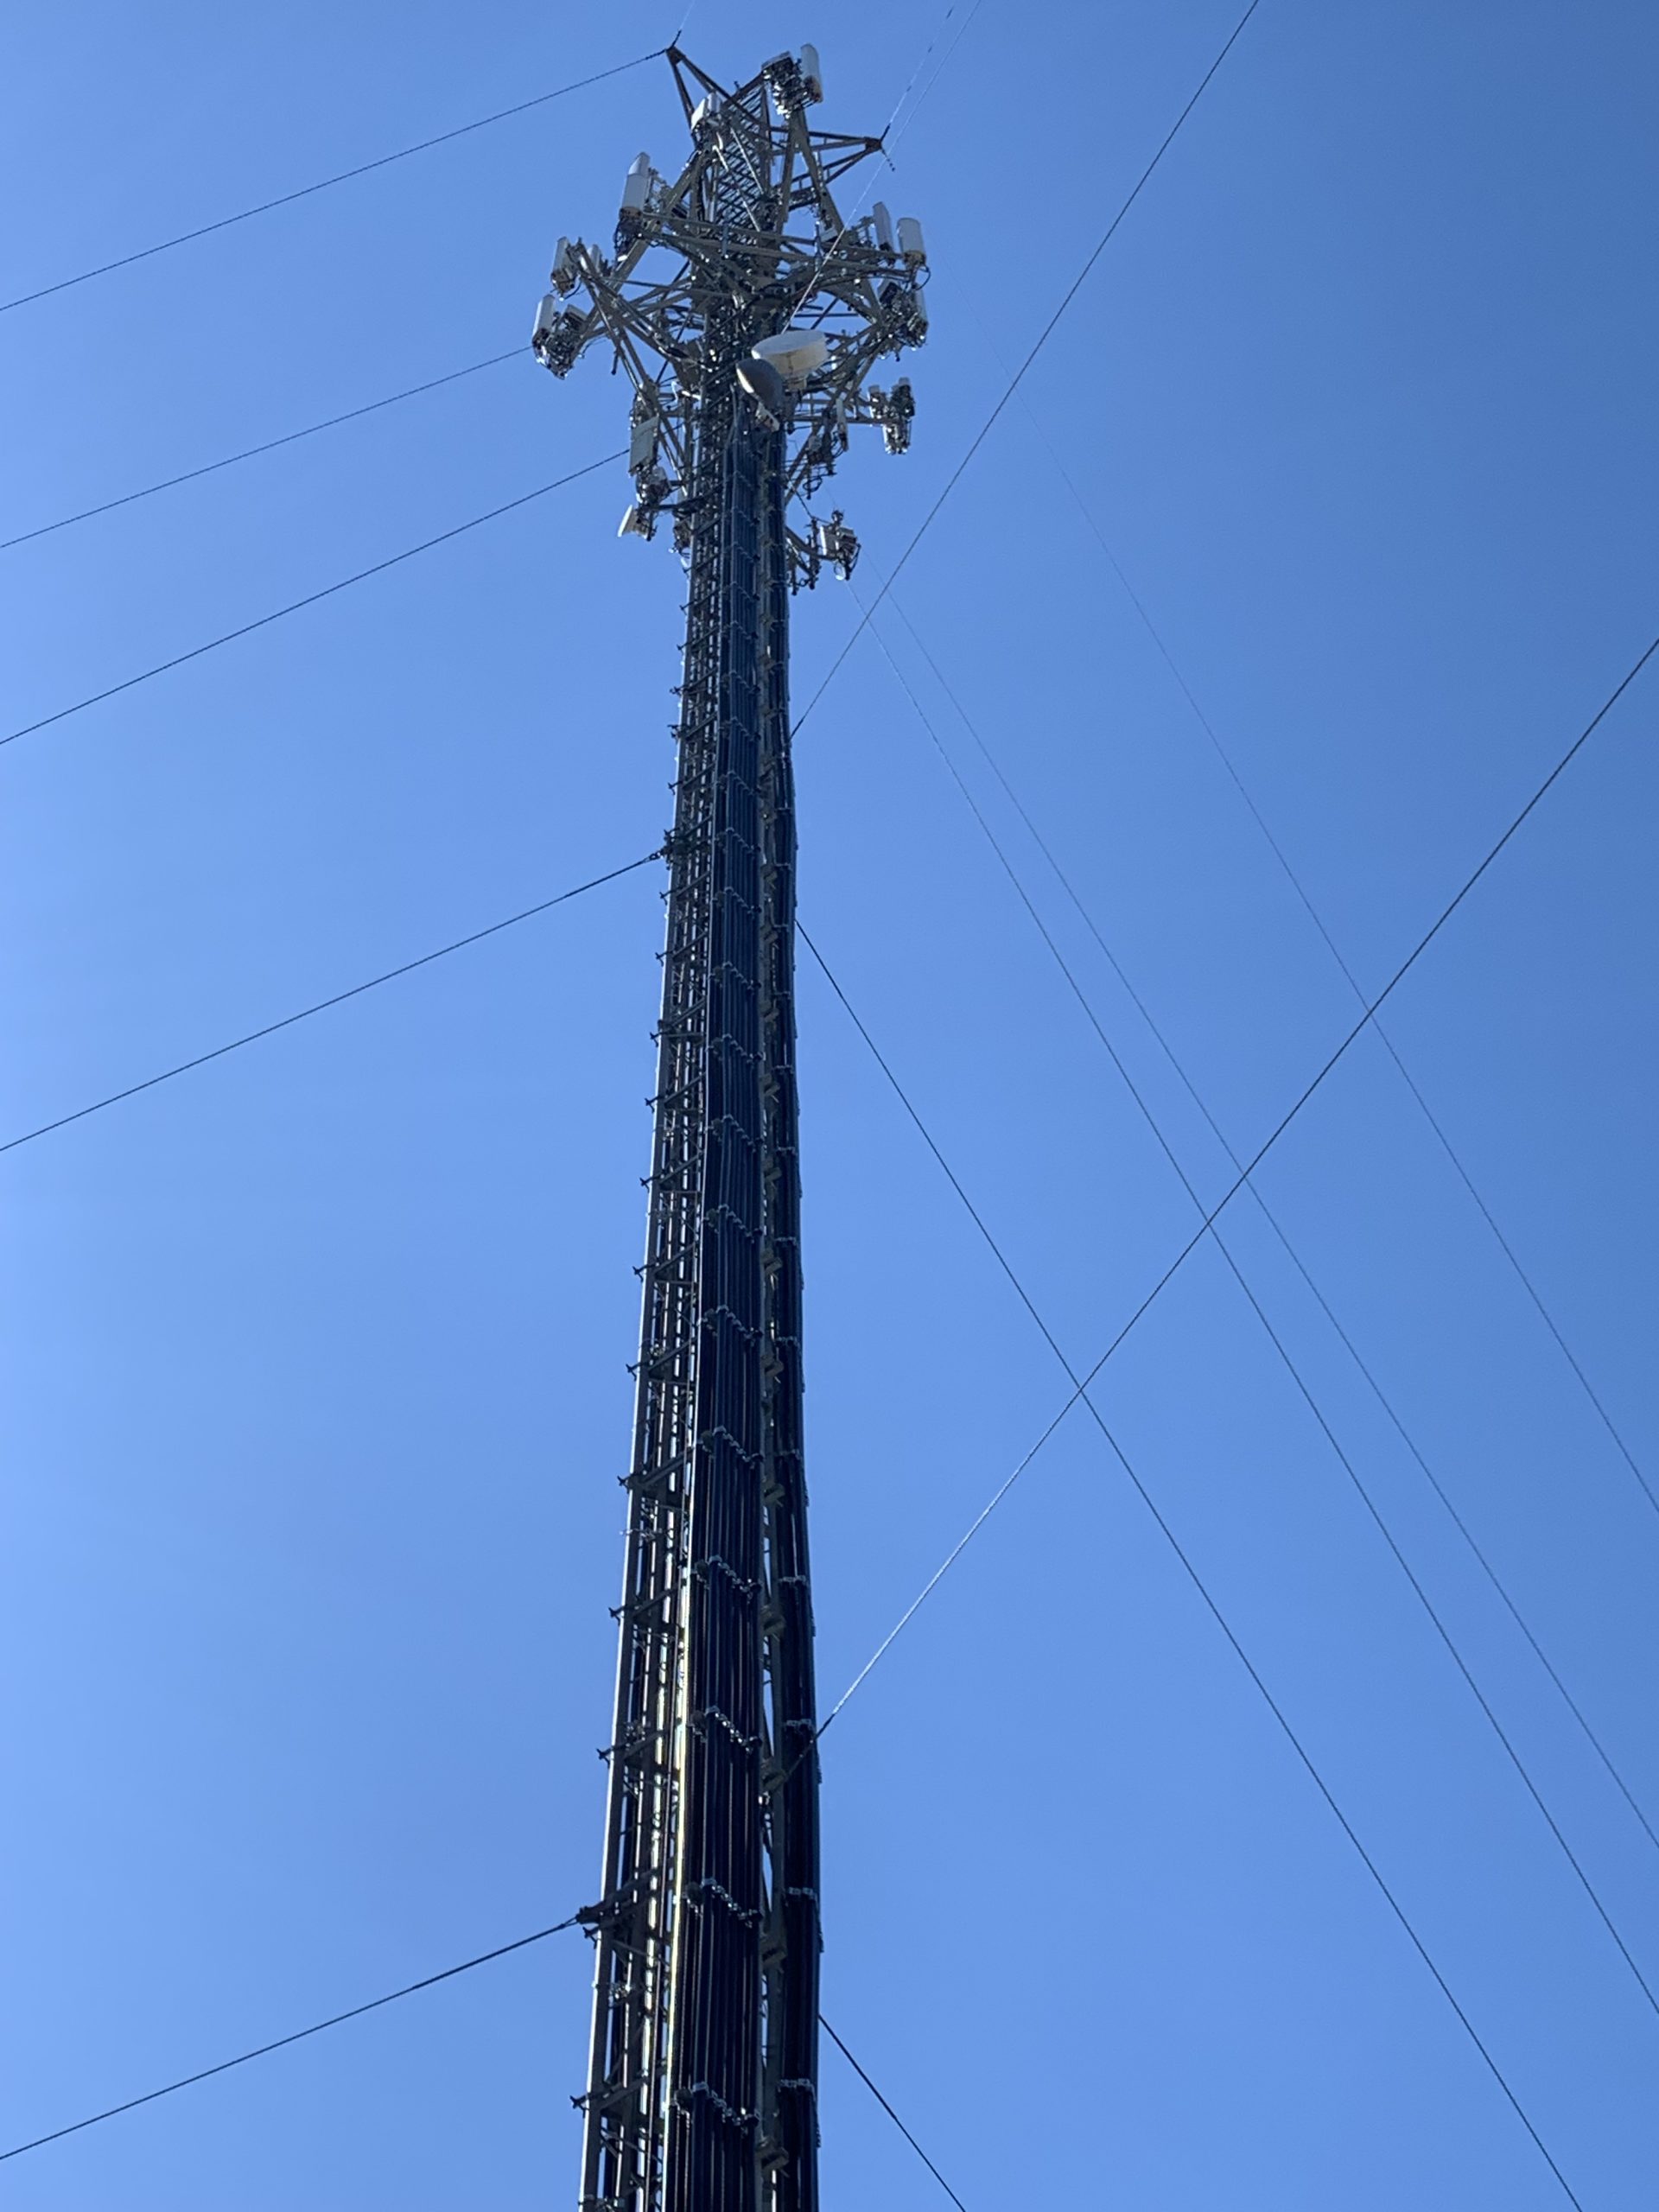 Image 2. Operator Mobile Sprint Telecom Tower (06/03/2019). PROJECTS RF USA